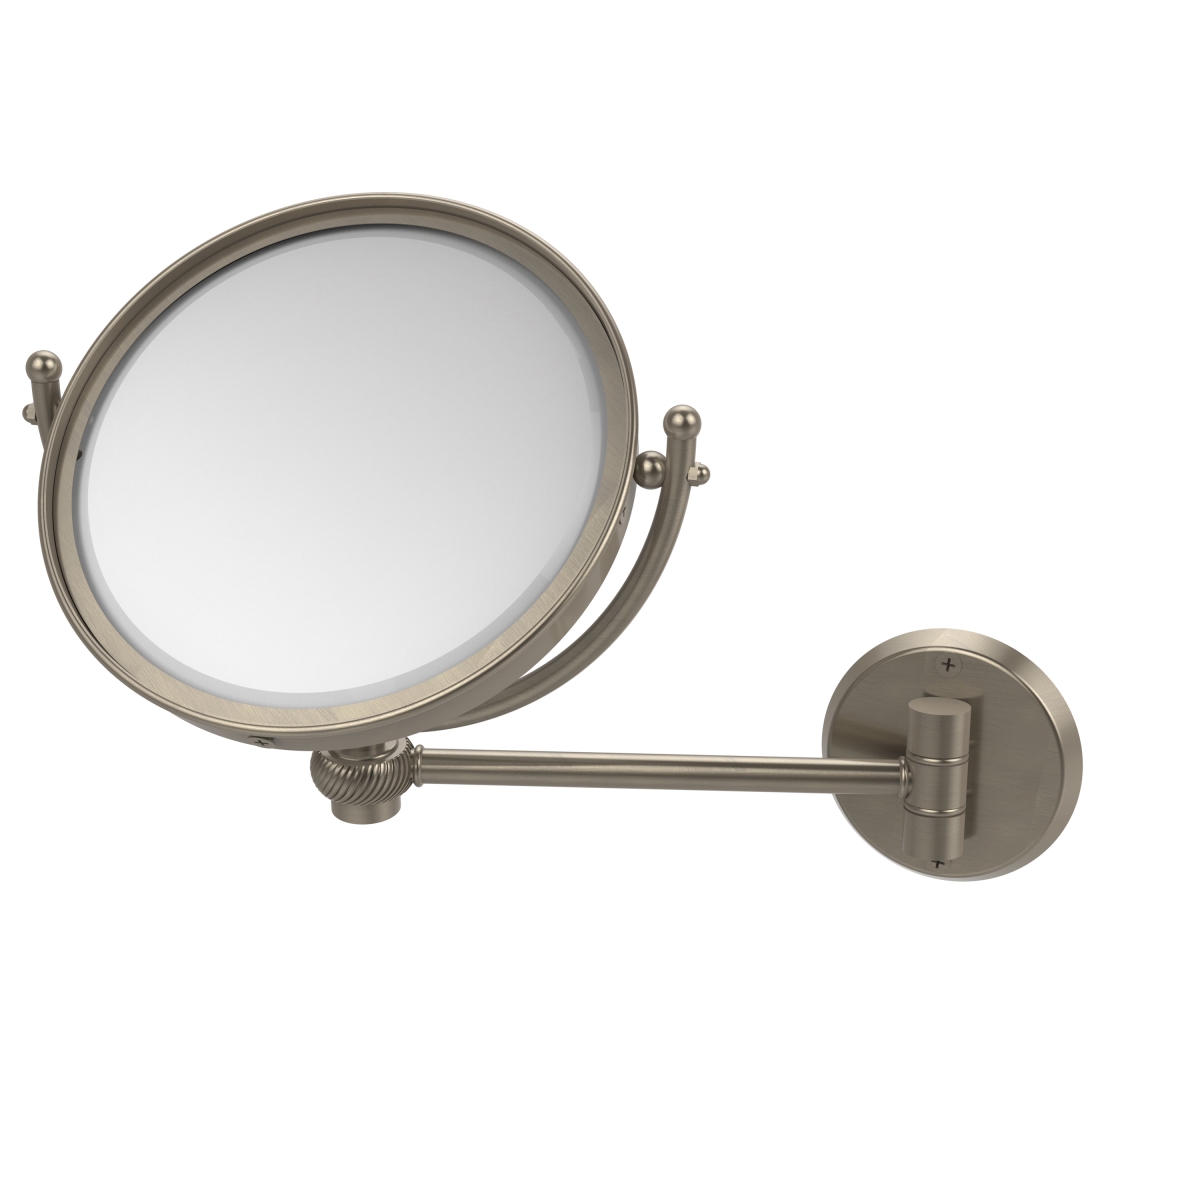 WM-5T-4X-PEW 8 in. Wall Mounted Make-Up Mirror 4X Magnification, Antique Pewter - 10 x 8 x 11 in -  Allied Brass, WM-5T/4X-PEW